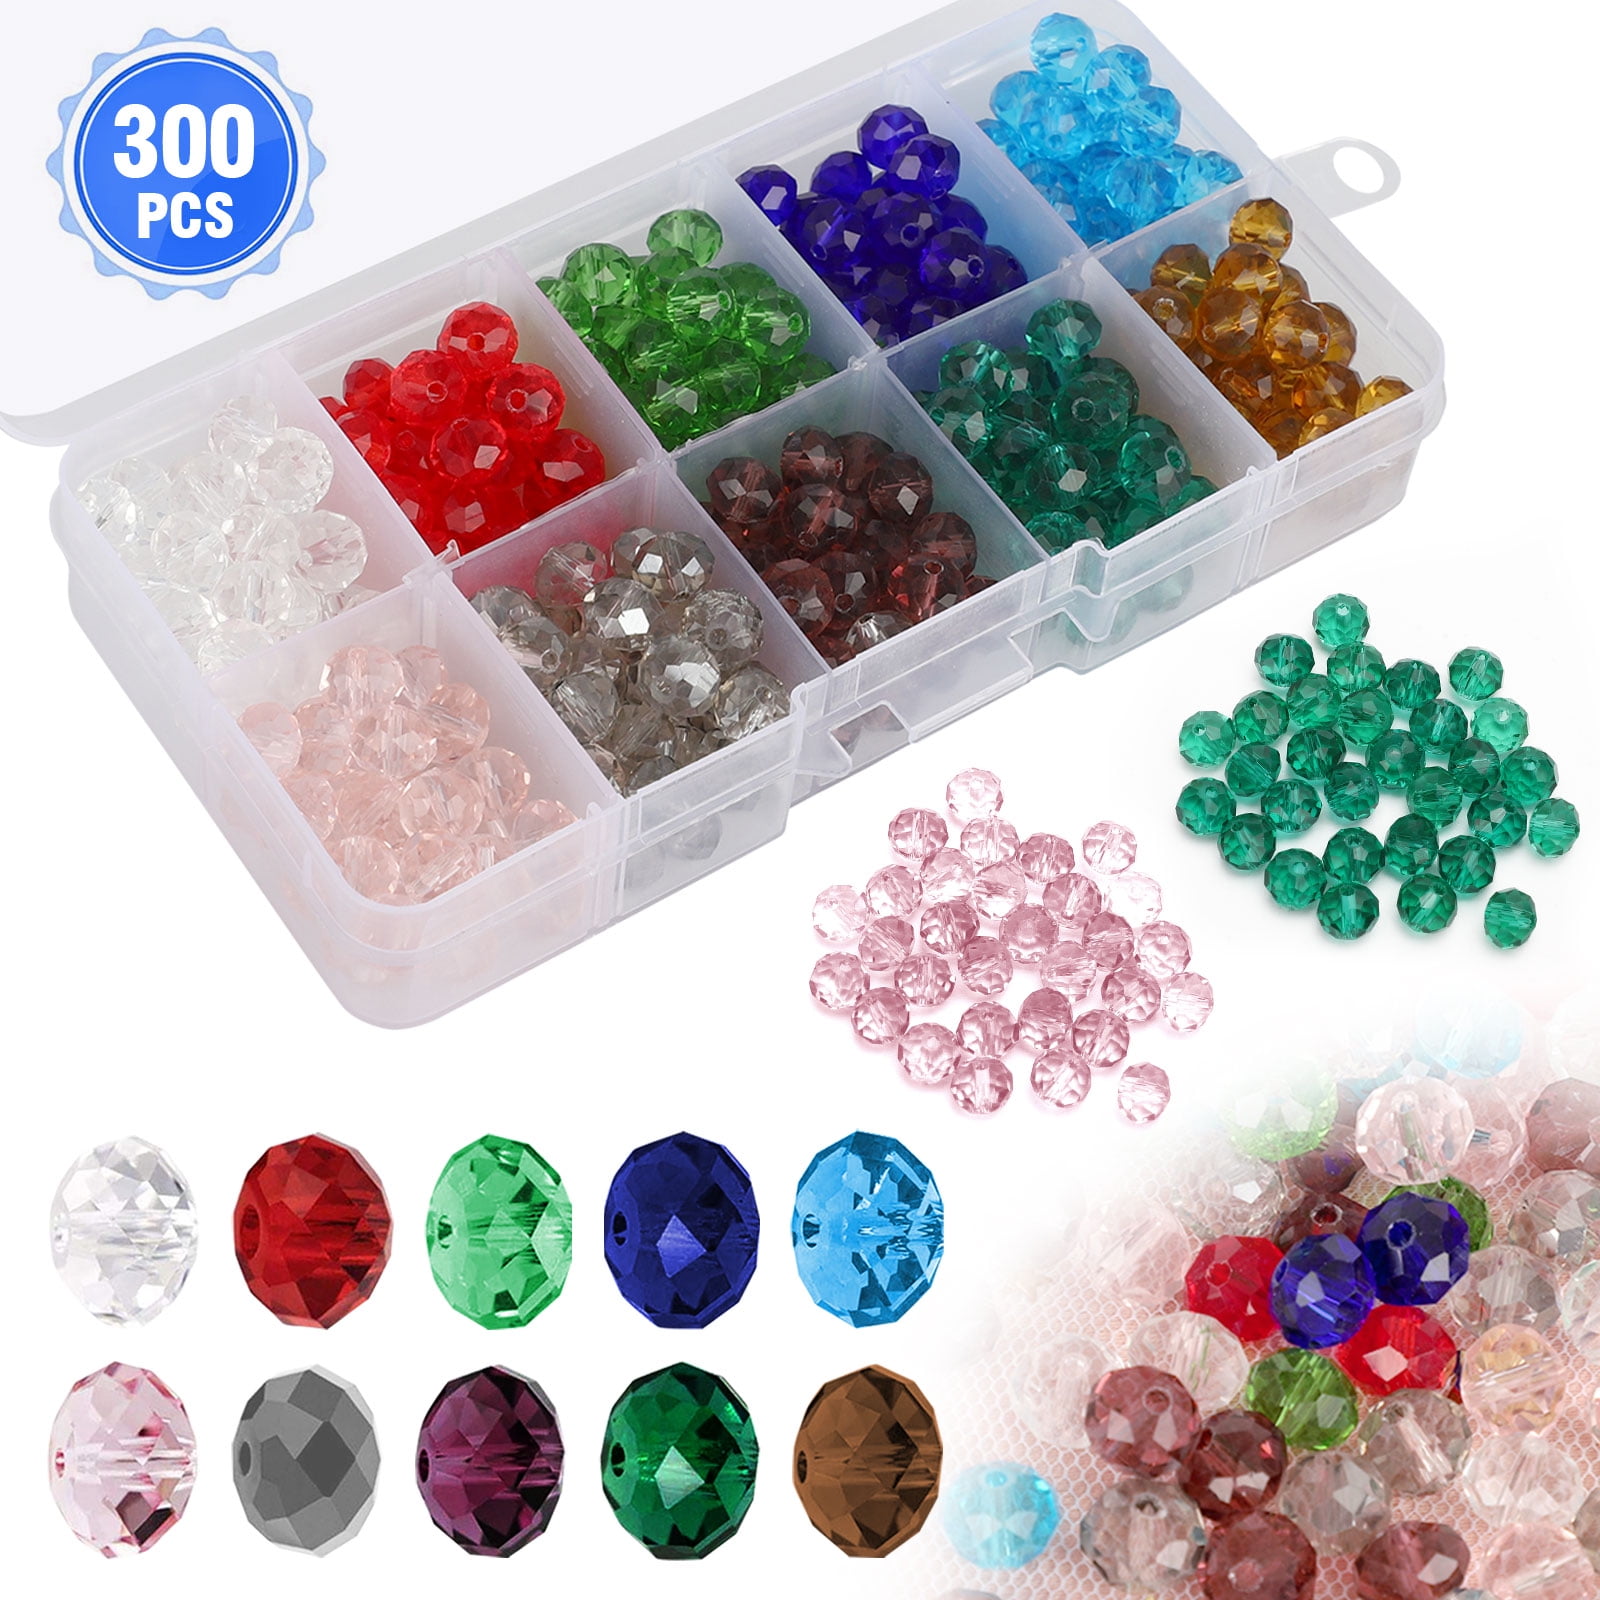 1000pcs 3mm Rondelle Faceted Crystal Glass Charms Loose Spacer Beads Findings